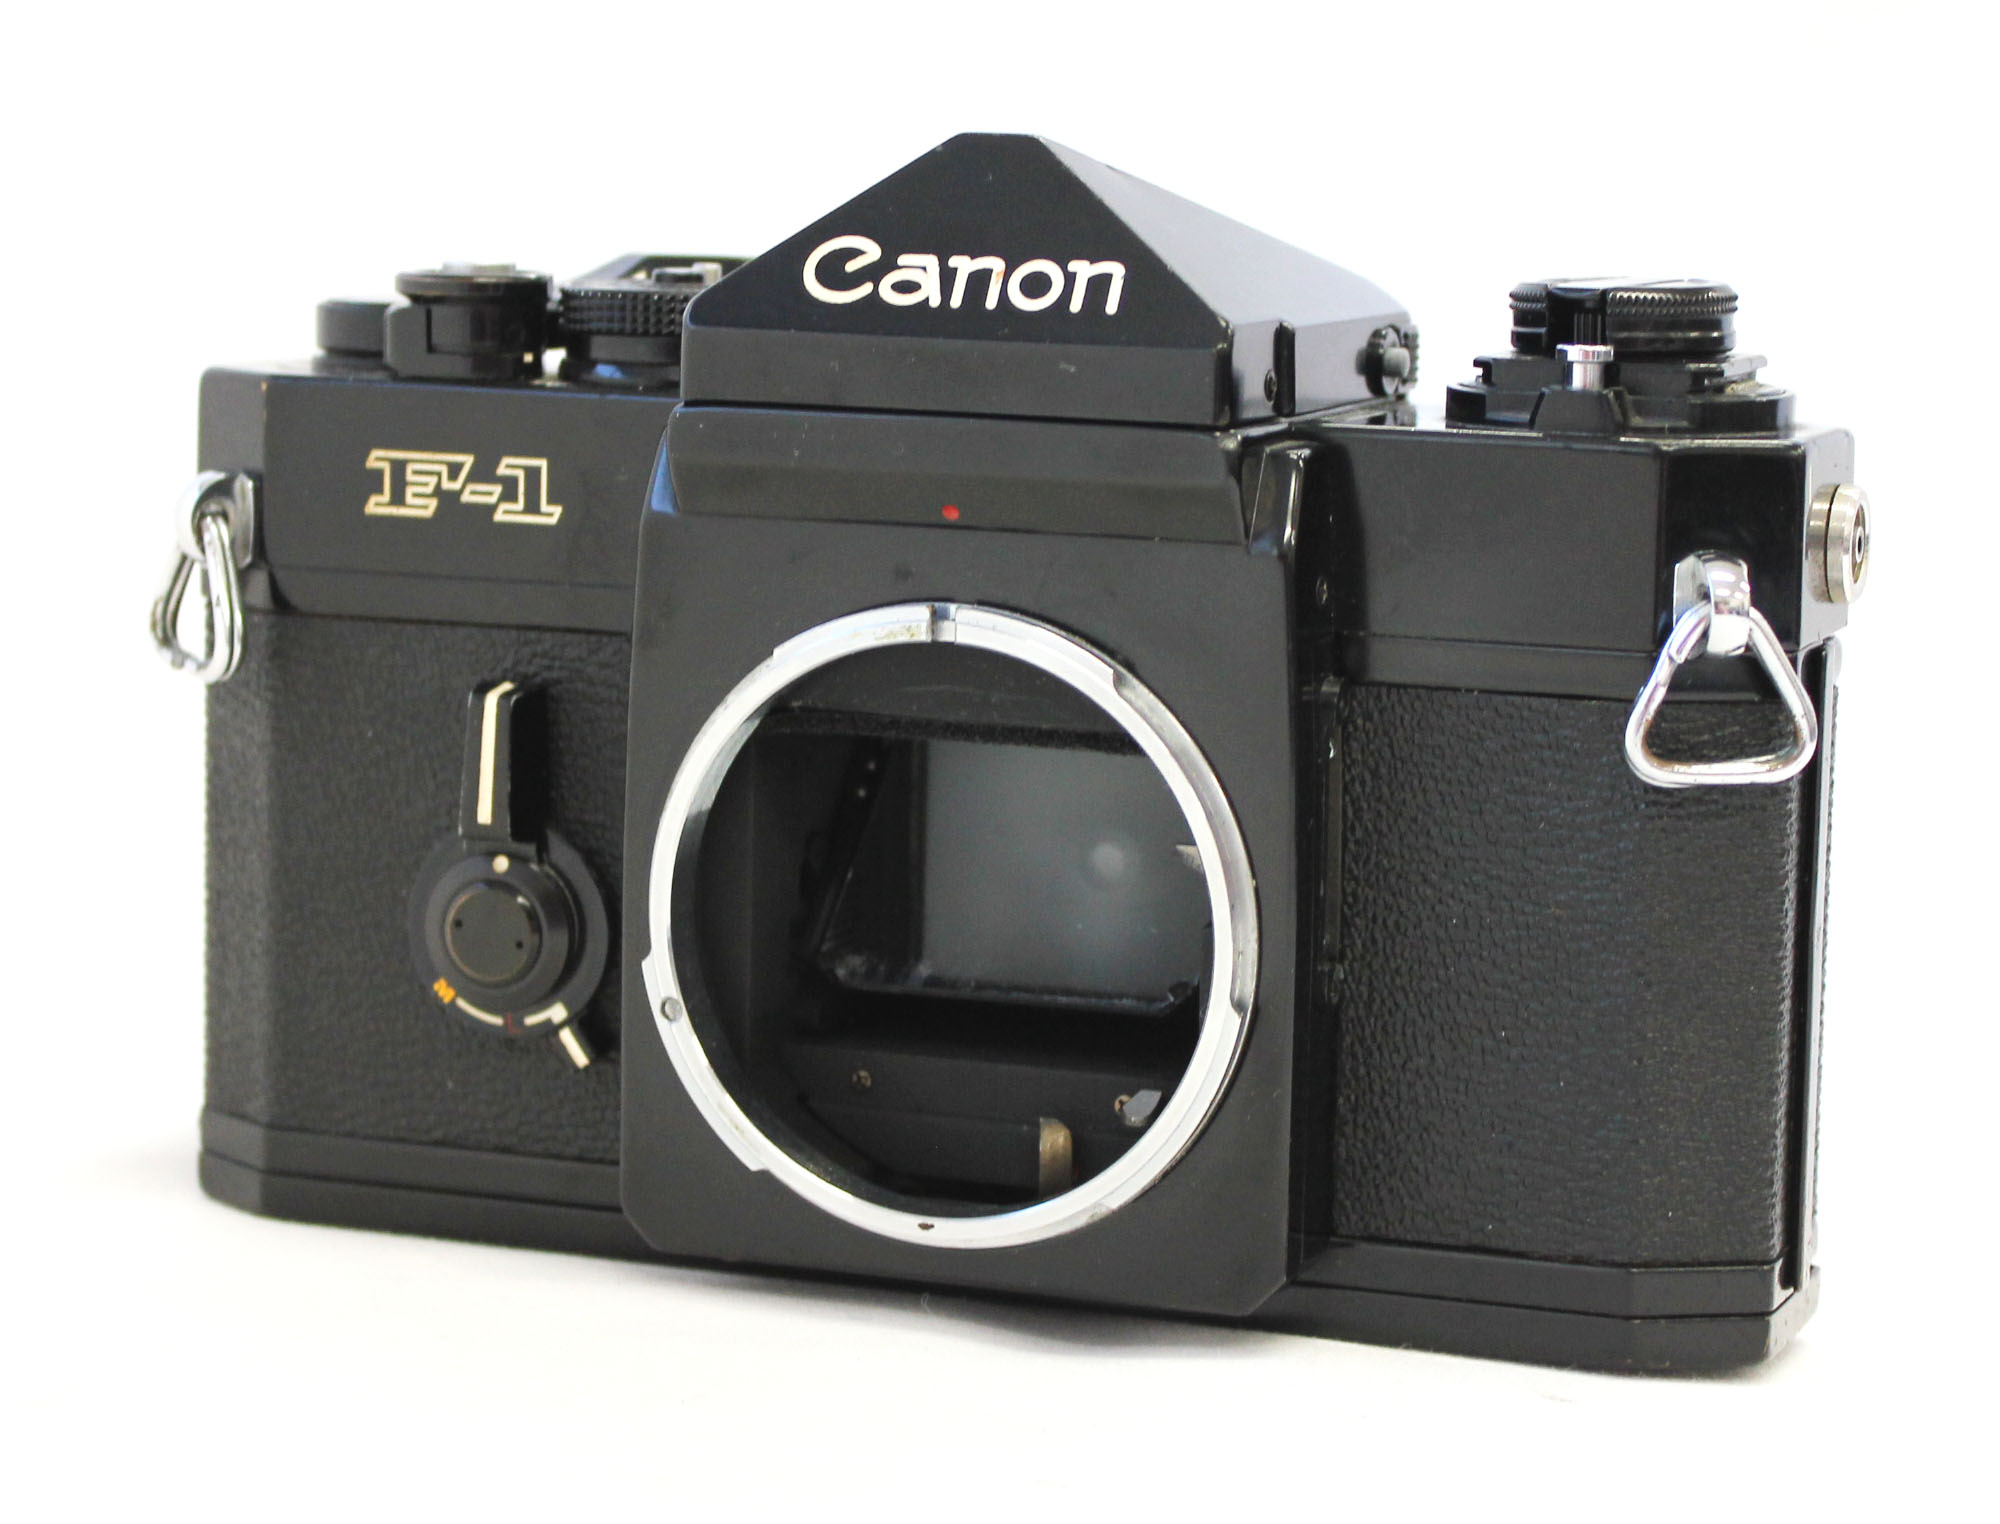 Japan Used Camera Shop | [Excellent++++] Canon F-1 Late Model 35mm SLR Film Camera Body from Japan